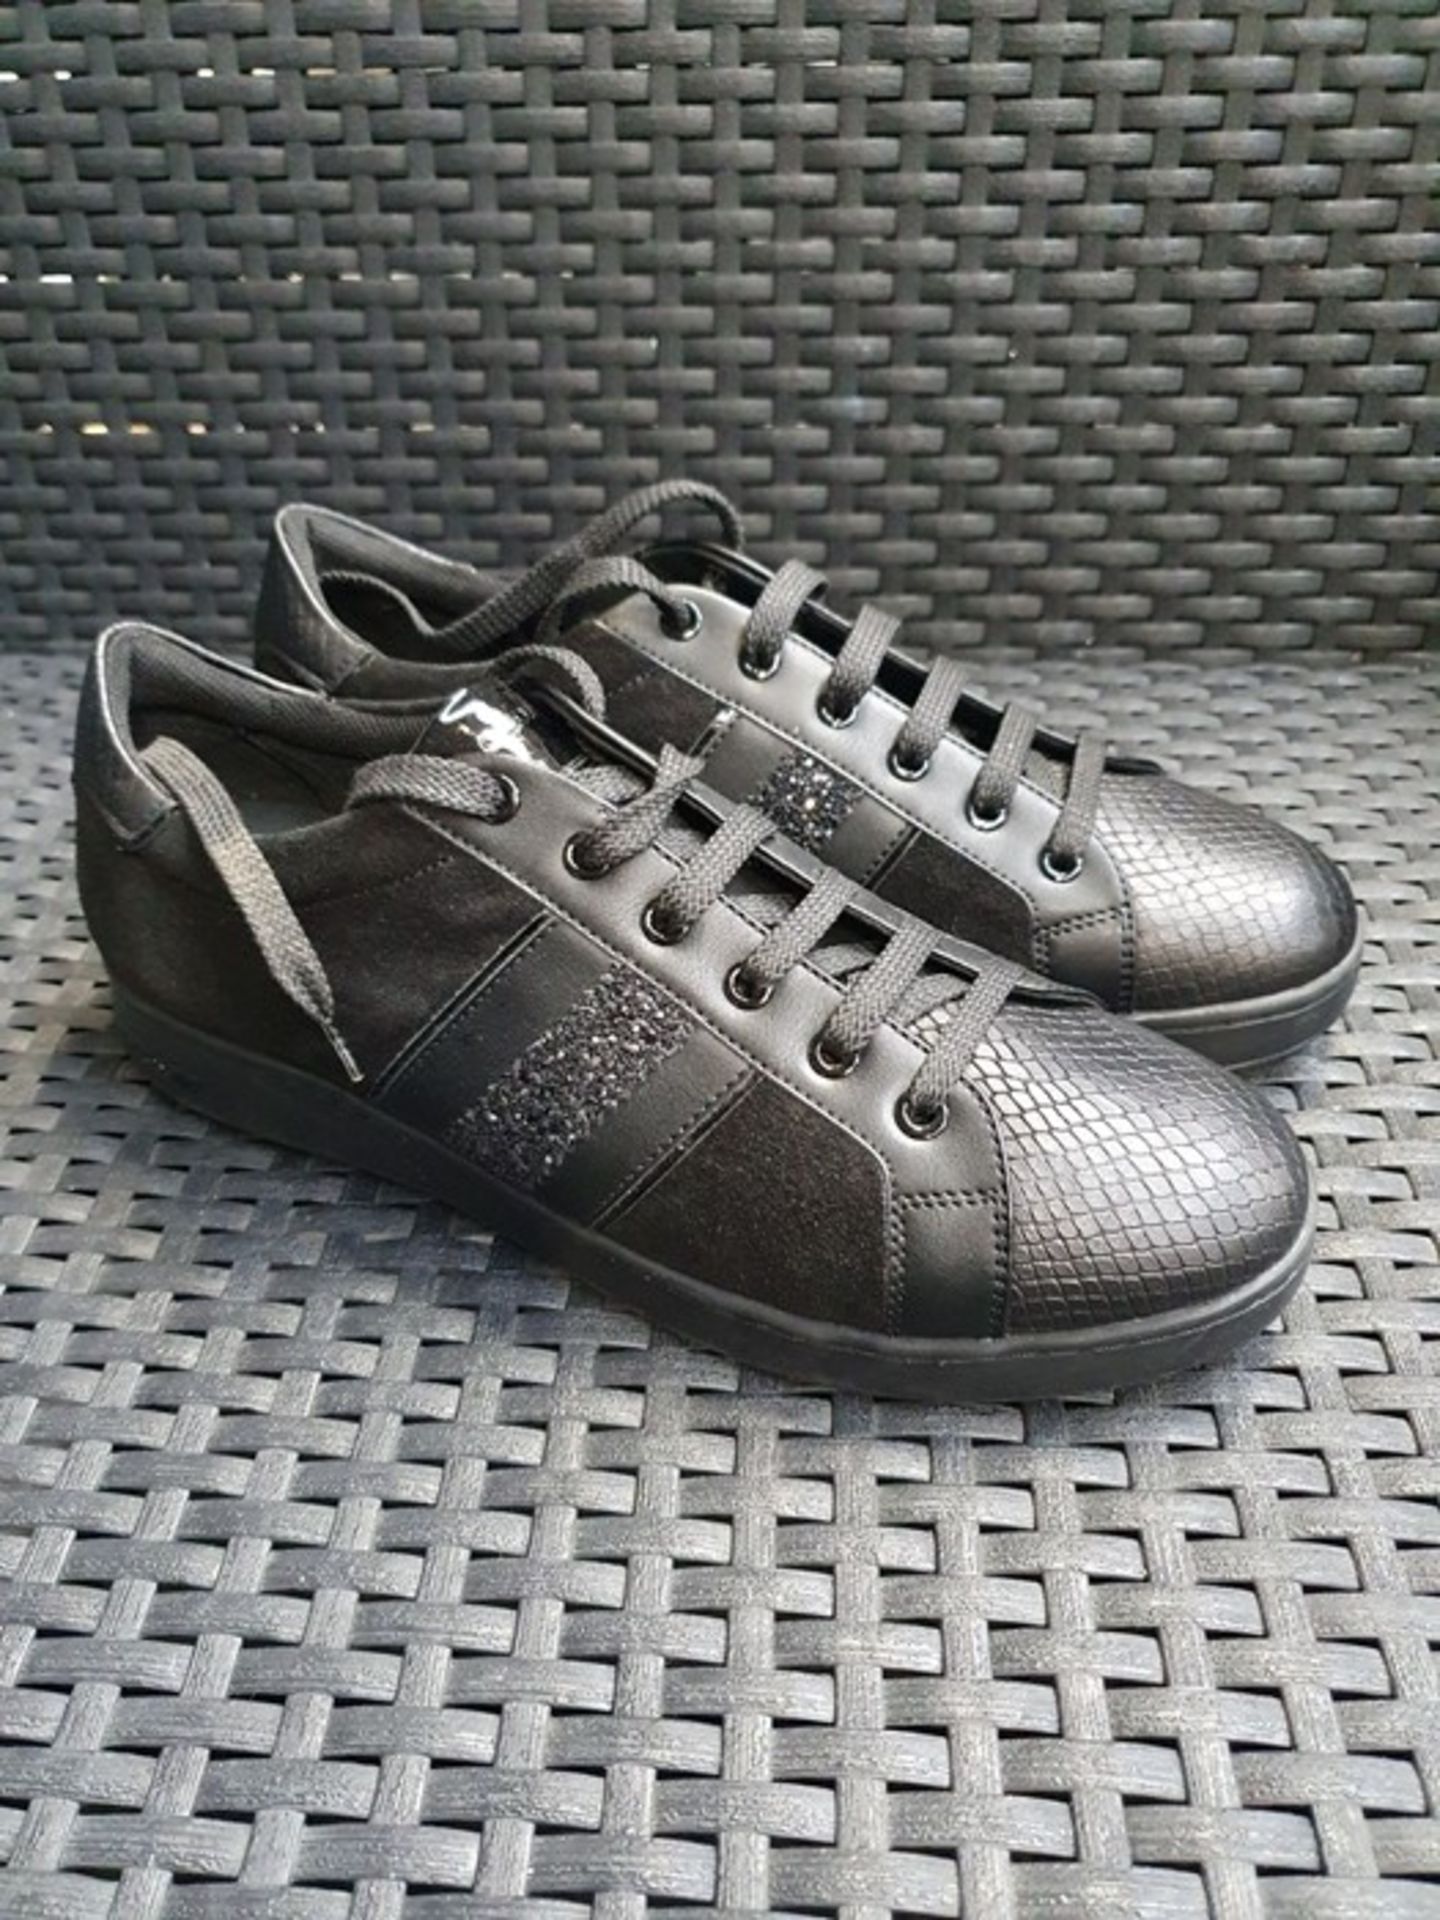 ONE PAIR OF GEOX JAYSEN LEATHER TRAINERS IN BLACK - SIZE UK 7. RRP £100.00 GRADE A* - AS NEW.